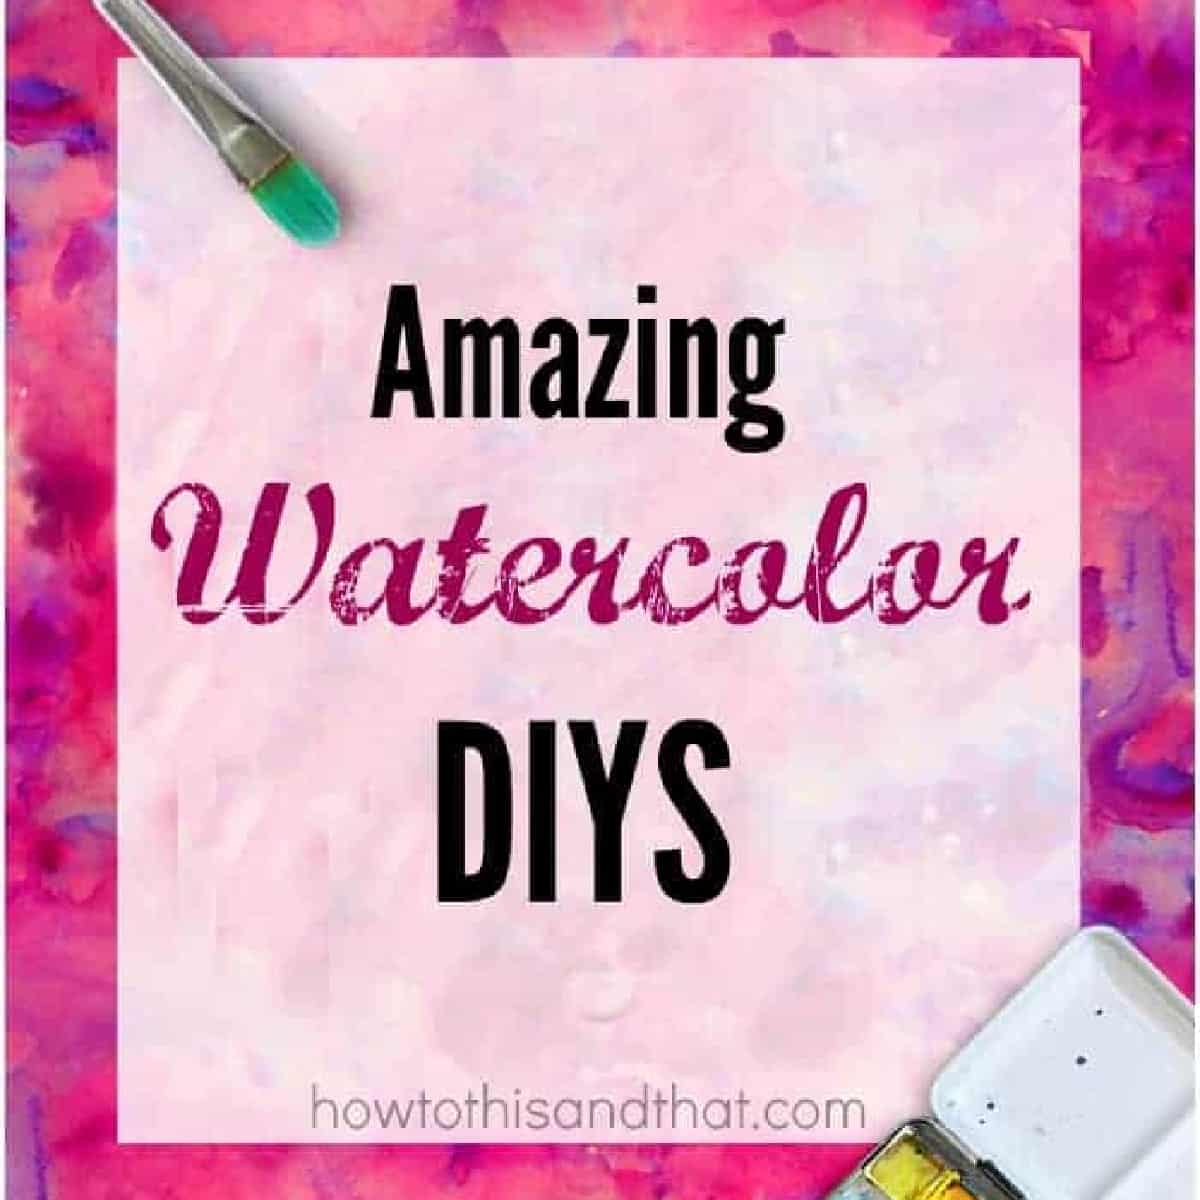 Amazing Watercolor DIY Projects That Are Easy & Inexpensive